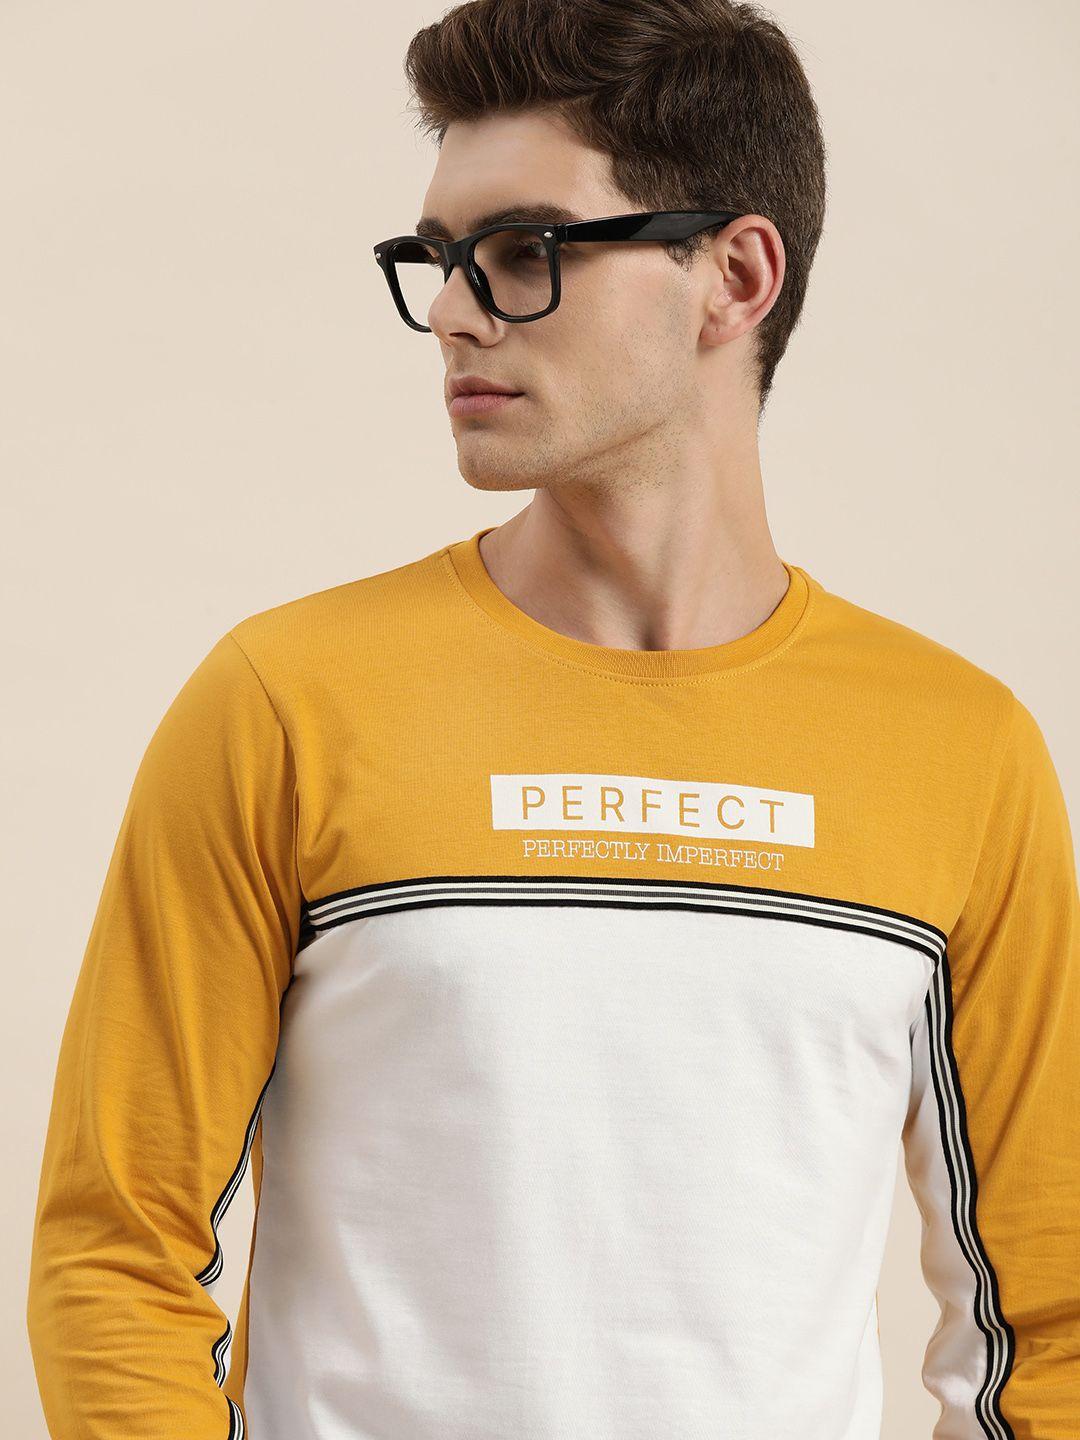 difference of opinion white  mustard yellow pure cotton colourblocked round neck pure cotton t-shirt